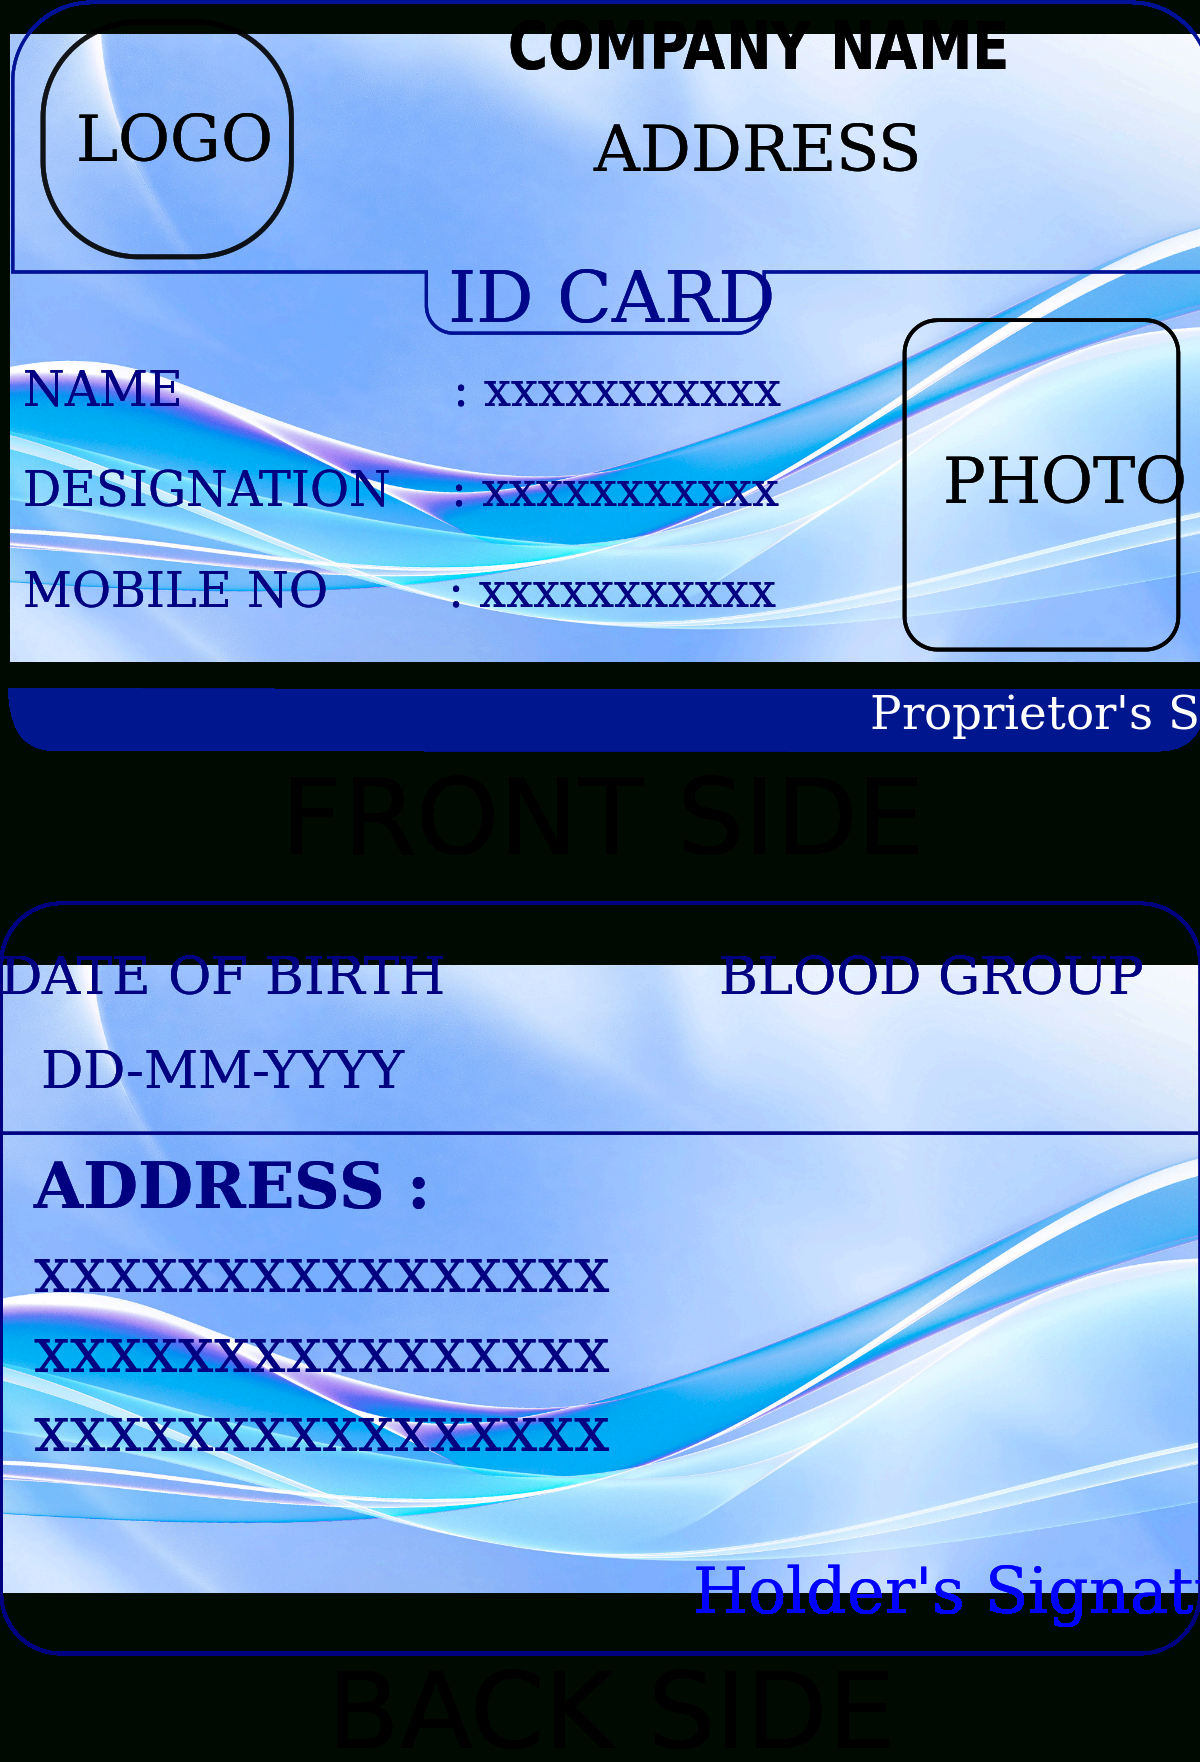 File:id Card Template.svg - Wikimedia Commons Regarding Personal Identification Card Template